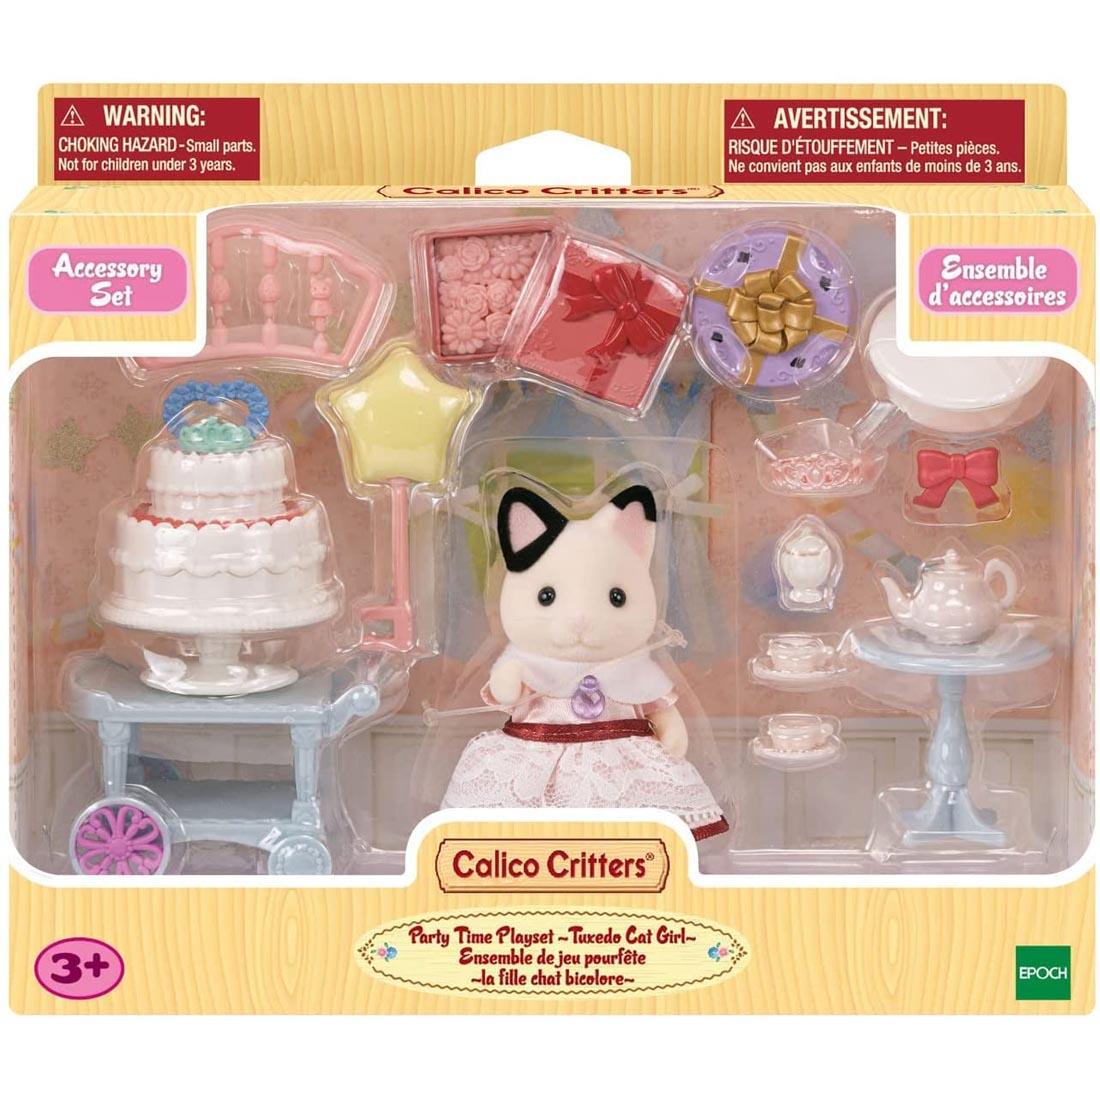 Calico Critters Tuxedo Cat Girl Party Time Playset